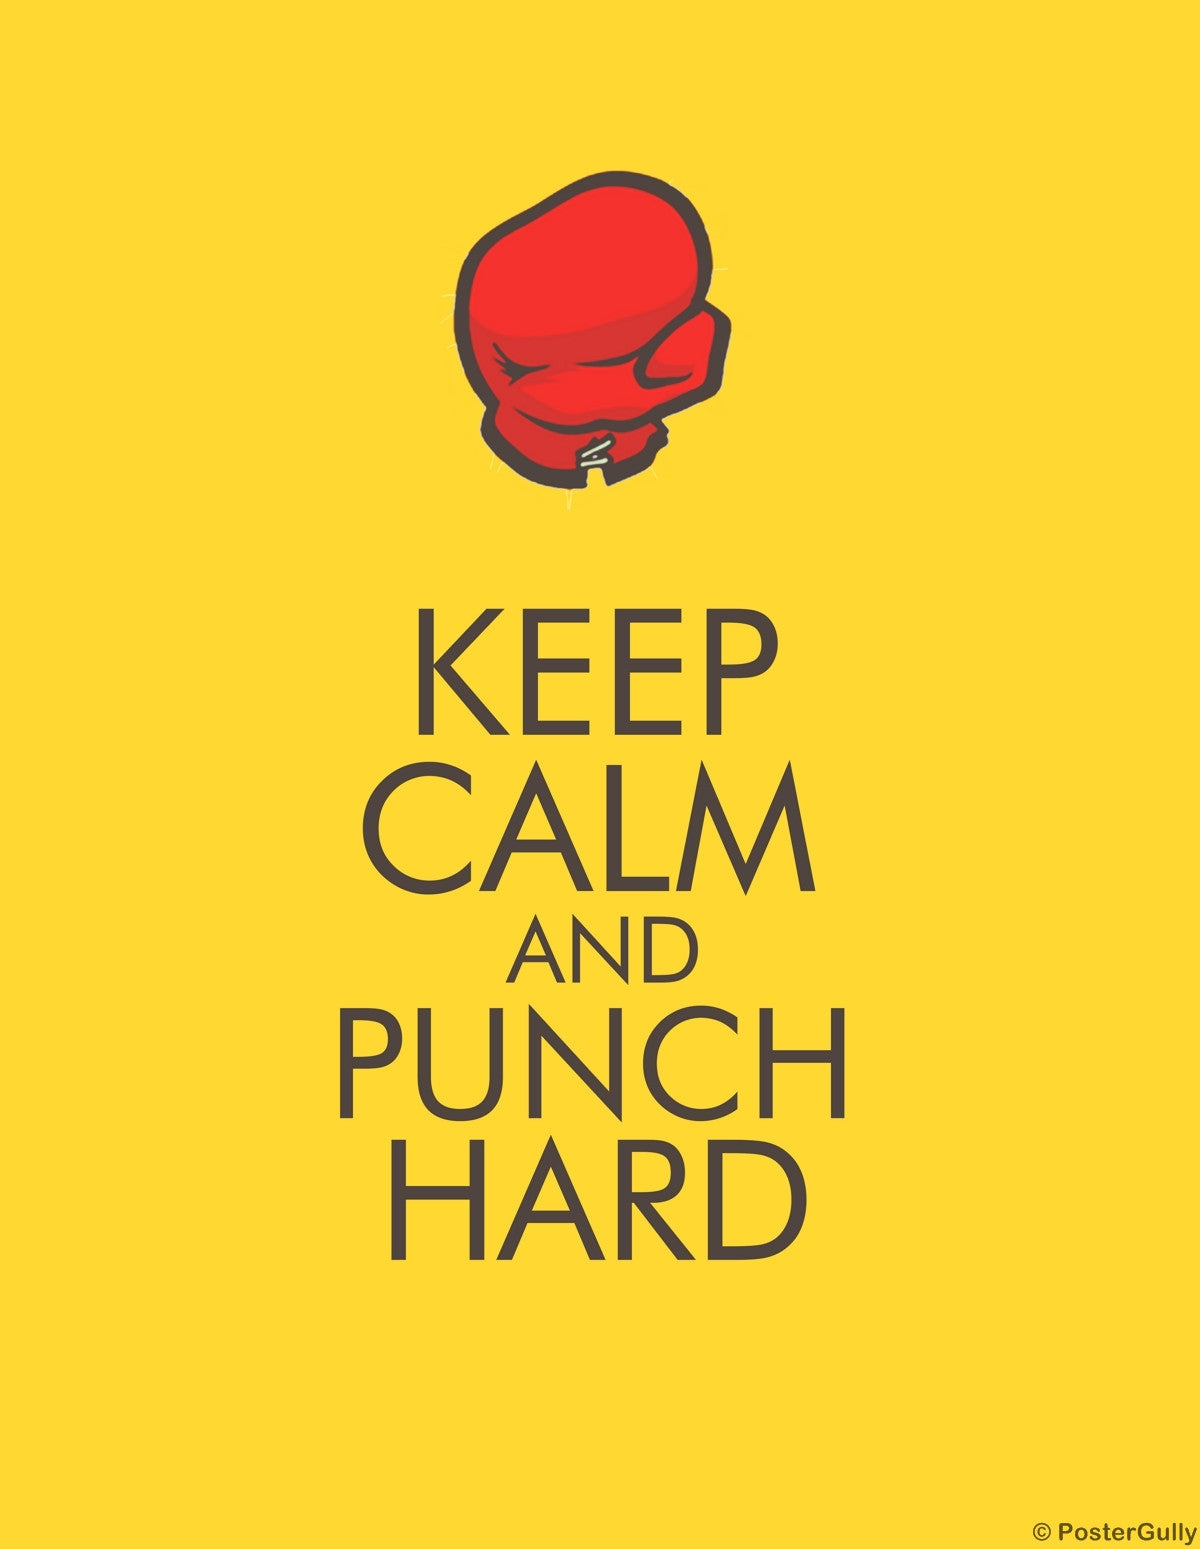 PosterGully Specials, Keep Calm & Punch Hard, - PosterGully